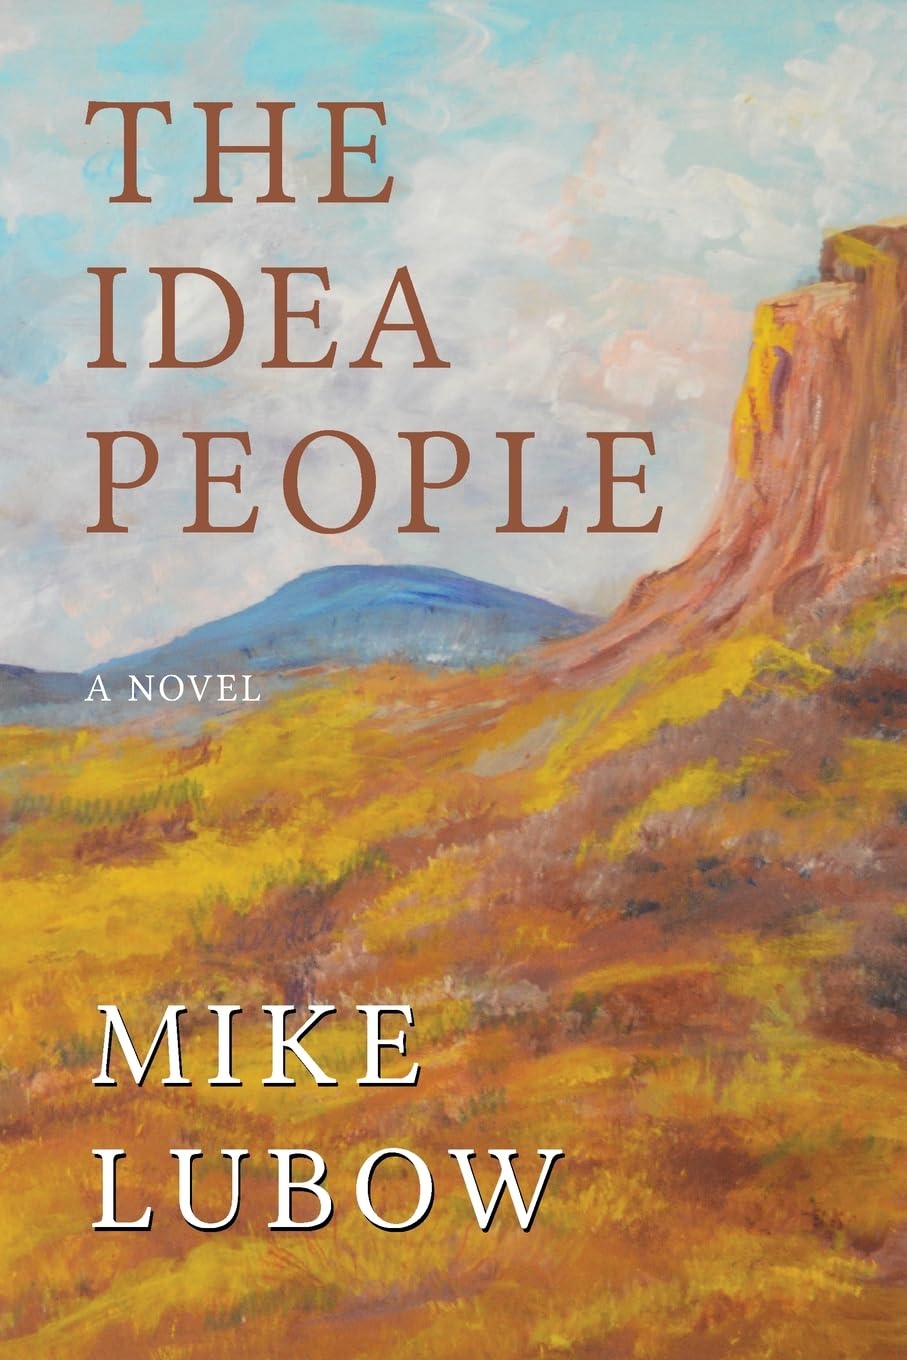 The Idea People by Mike Lubow